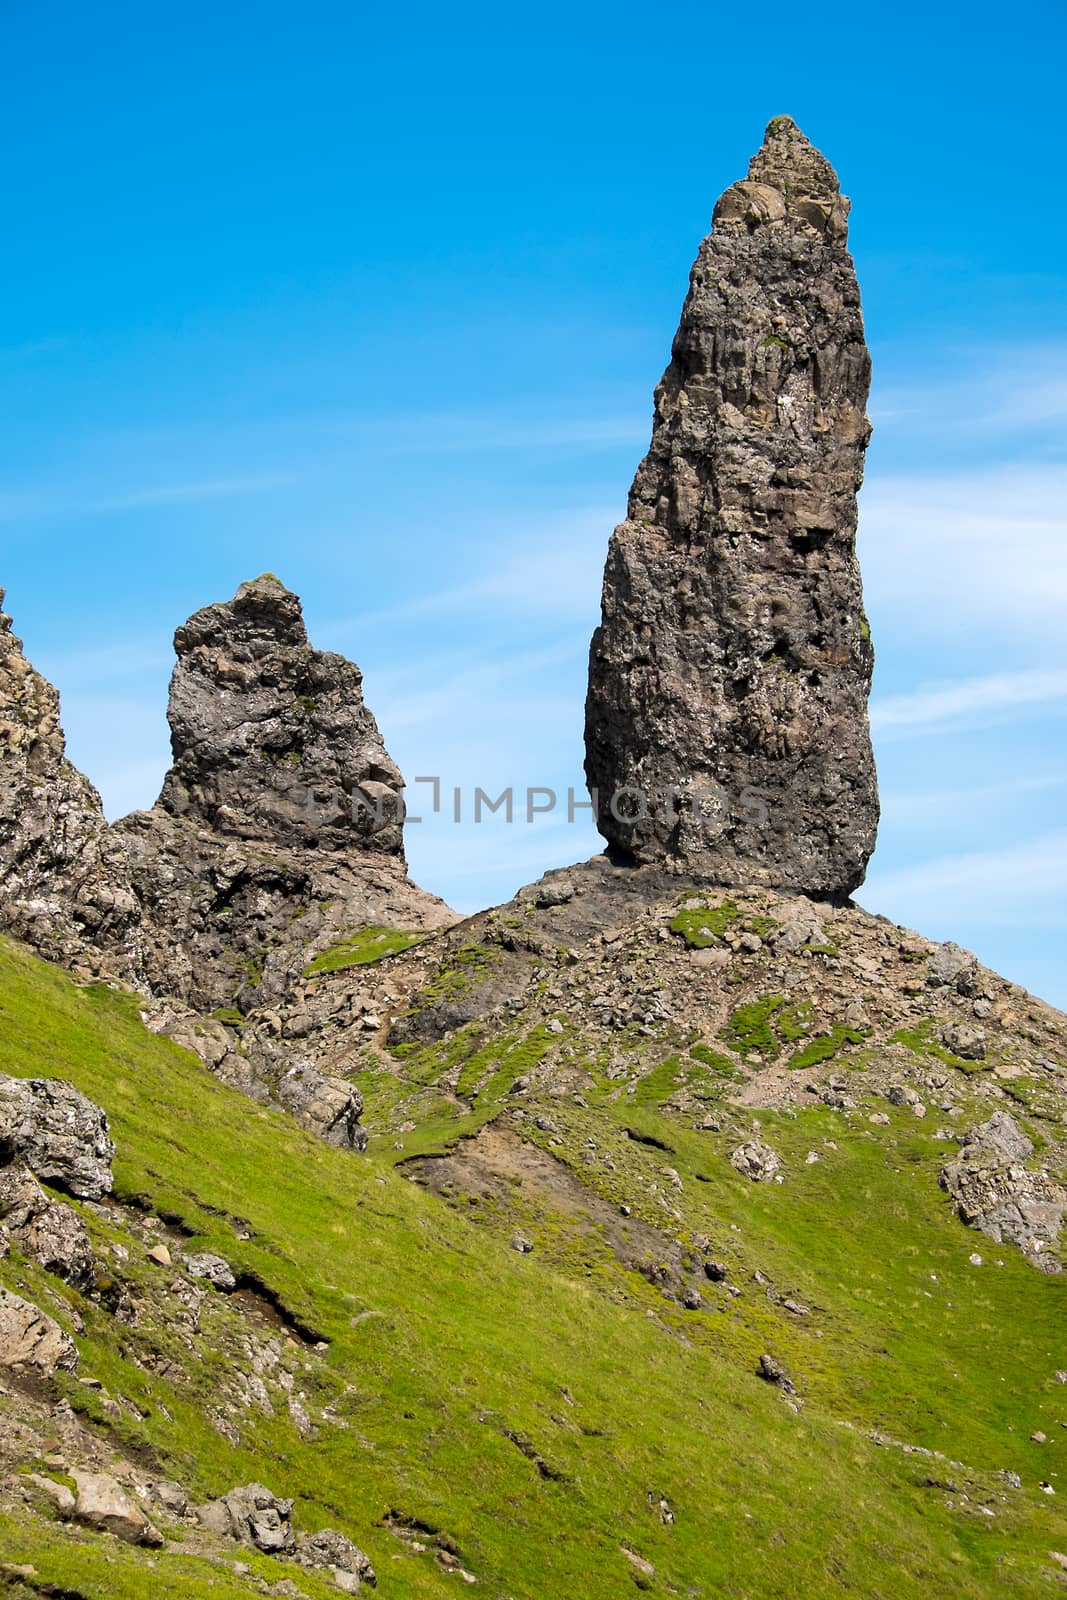 The famous Old Man of Storr on the Isle of Skye